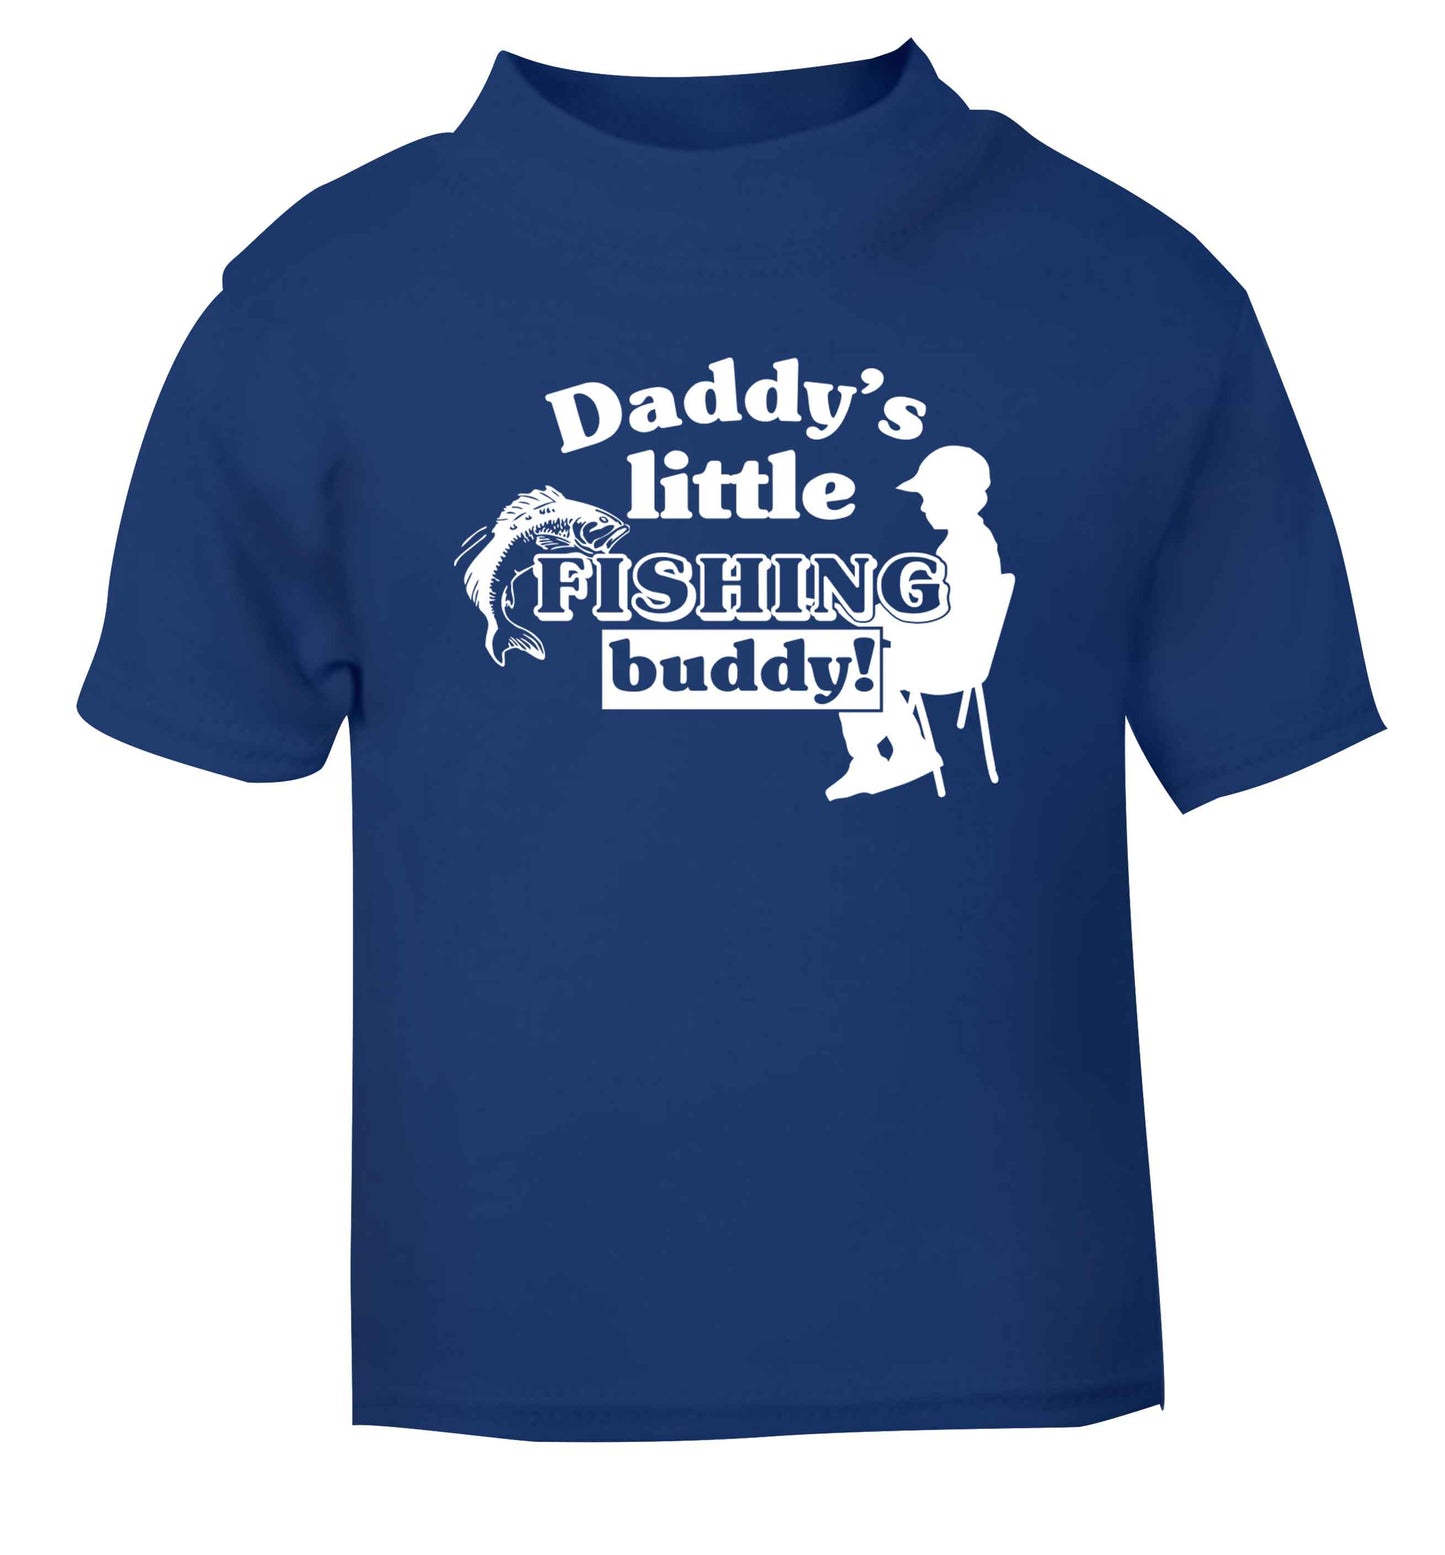 Daddy's little fishing buddy blue Baby Toddler Tshirt 2 Years